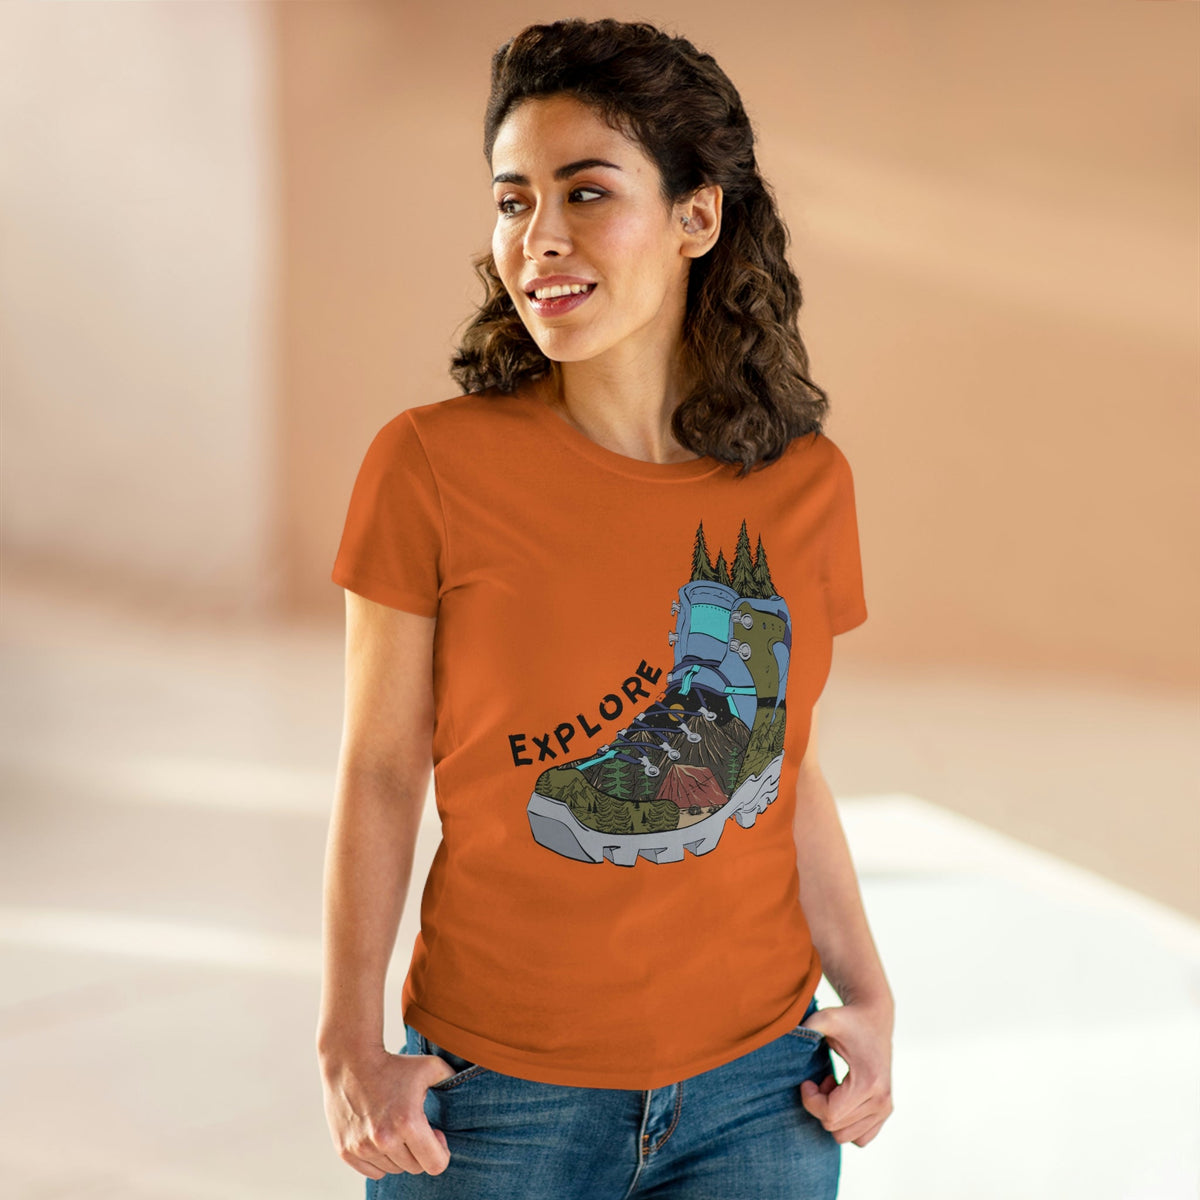 Explore Women's Midweight Cotton Tee - Salty Medic Clothing Co.